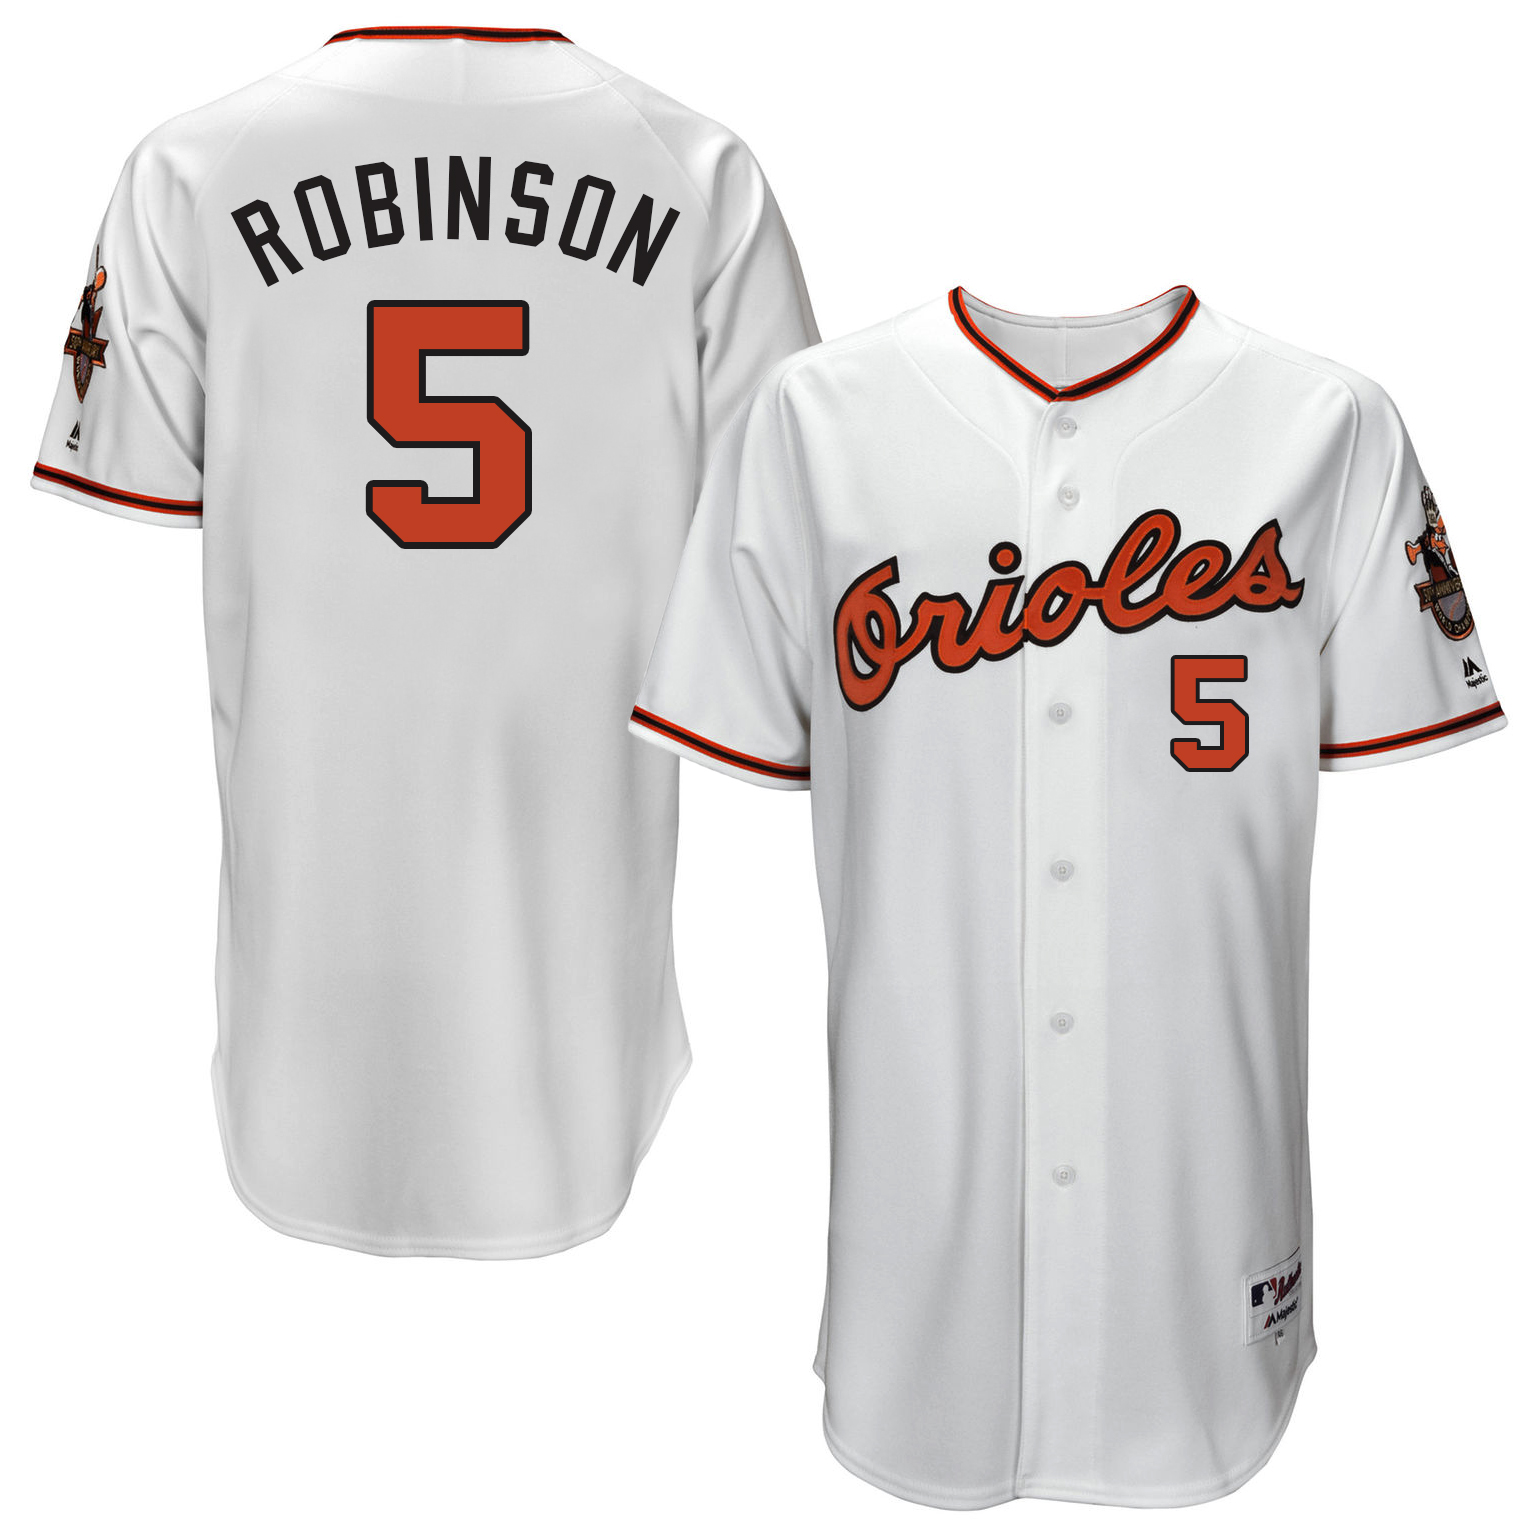 Orioles 5 Frank Robinson White Throwback Jersey